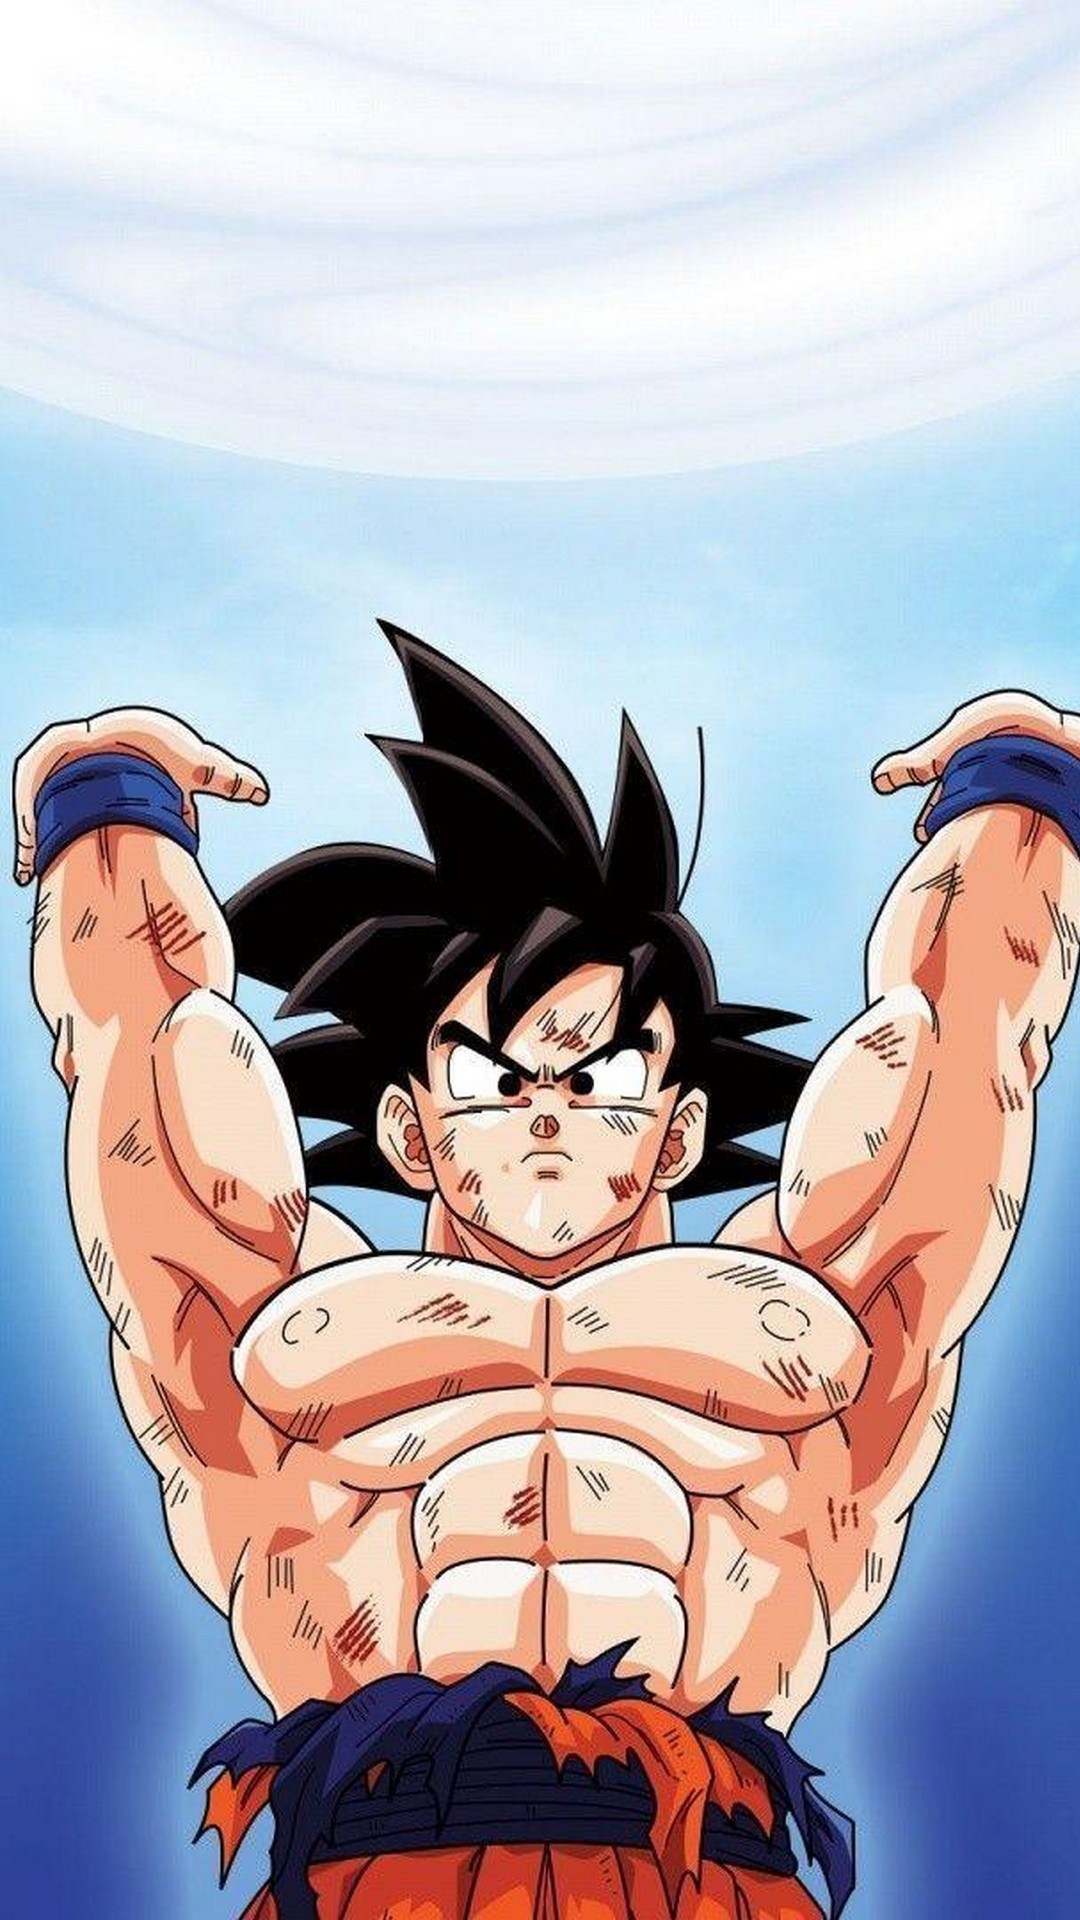 Goku Images Mobile Wallpaper with high-resolution 1080x1920 pixel. You can use and set as wallpaper for Notebook Screensavers, Mac Wallpapers, Mobile Home Screen, iPhone or Android Phones Lock Screen